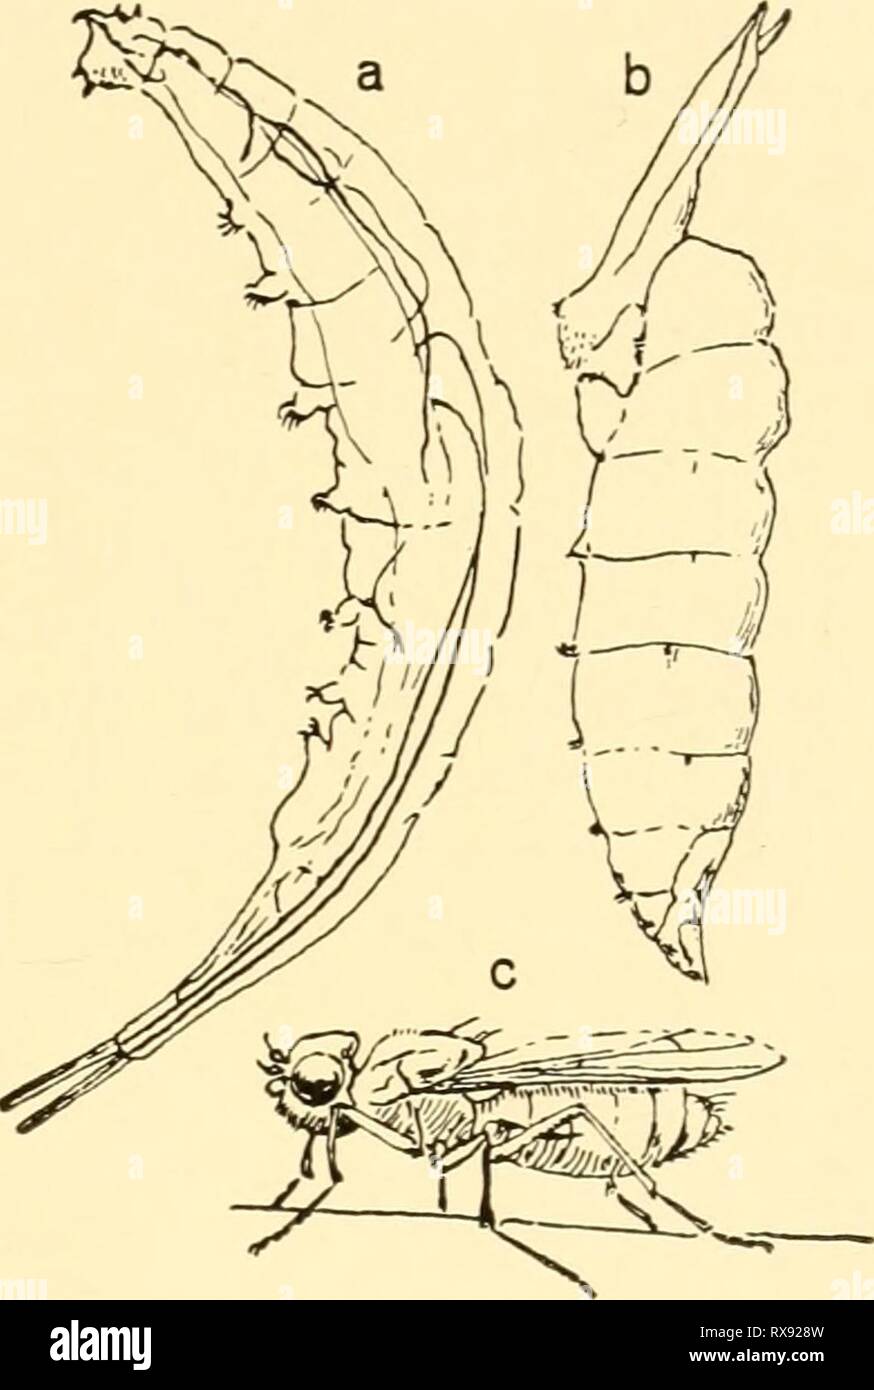 Ecological animal geography; an authorized, Ecological animal geography; an authorized, rewritten edition based on Tiergeographie auf ockologischer grundlage ecologicalanimal00hess Year: 1937  Fig. 106 Fig. 107 Fig. 106.—Salt-water crustacean, Artemia salina. X 0V2. After Brauer. Fig. 107.—Salt-water fly, Ephydra macellaria; a, larva; b, pupa; c, adult. X 6. After Steuer. higher concentration. The larvae of may flies and stone flies and usually of caddis flies are absent. Of mollusks of temperate zones only Limnaea ovata occurs in water with slightly increased salt content. Amphibians are almo Stock Photo